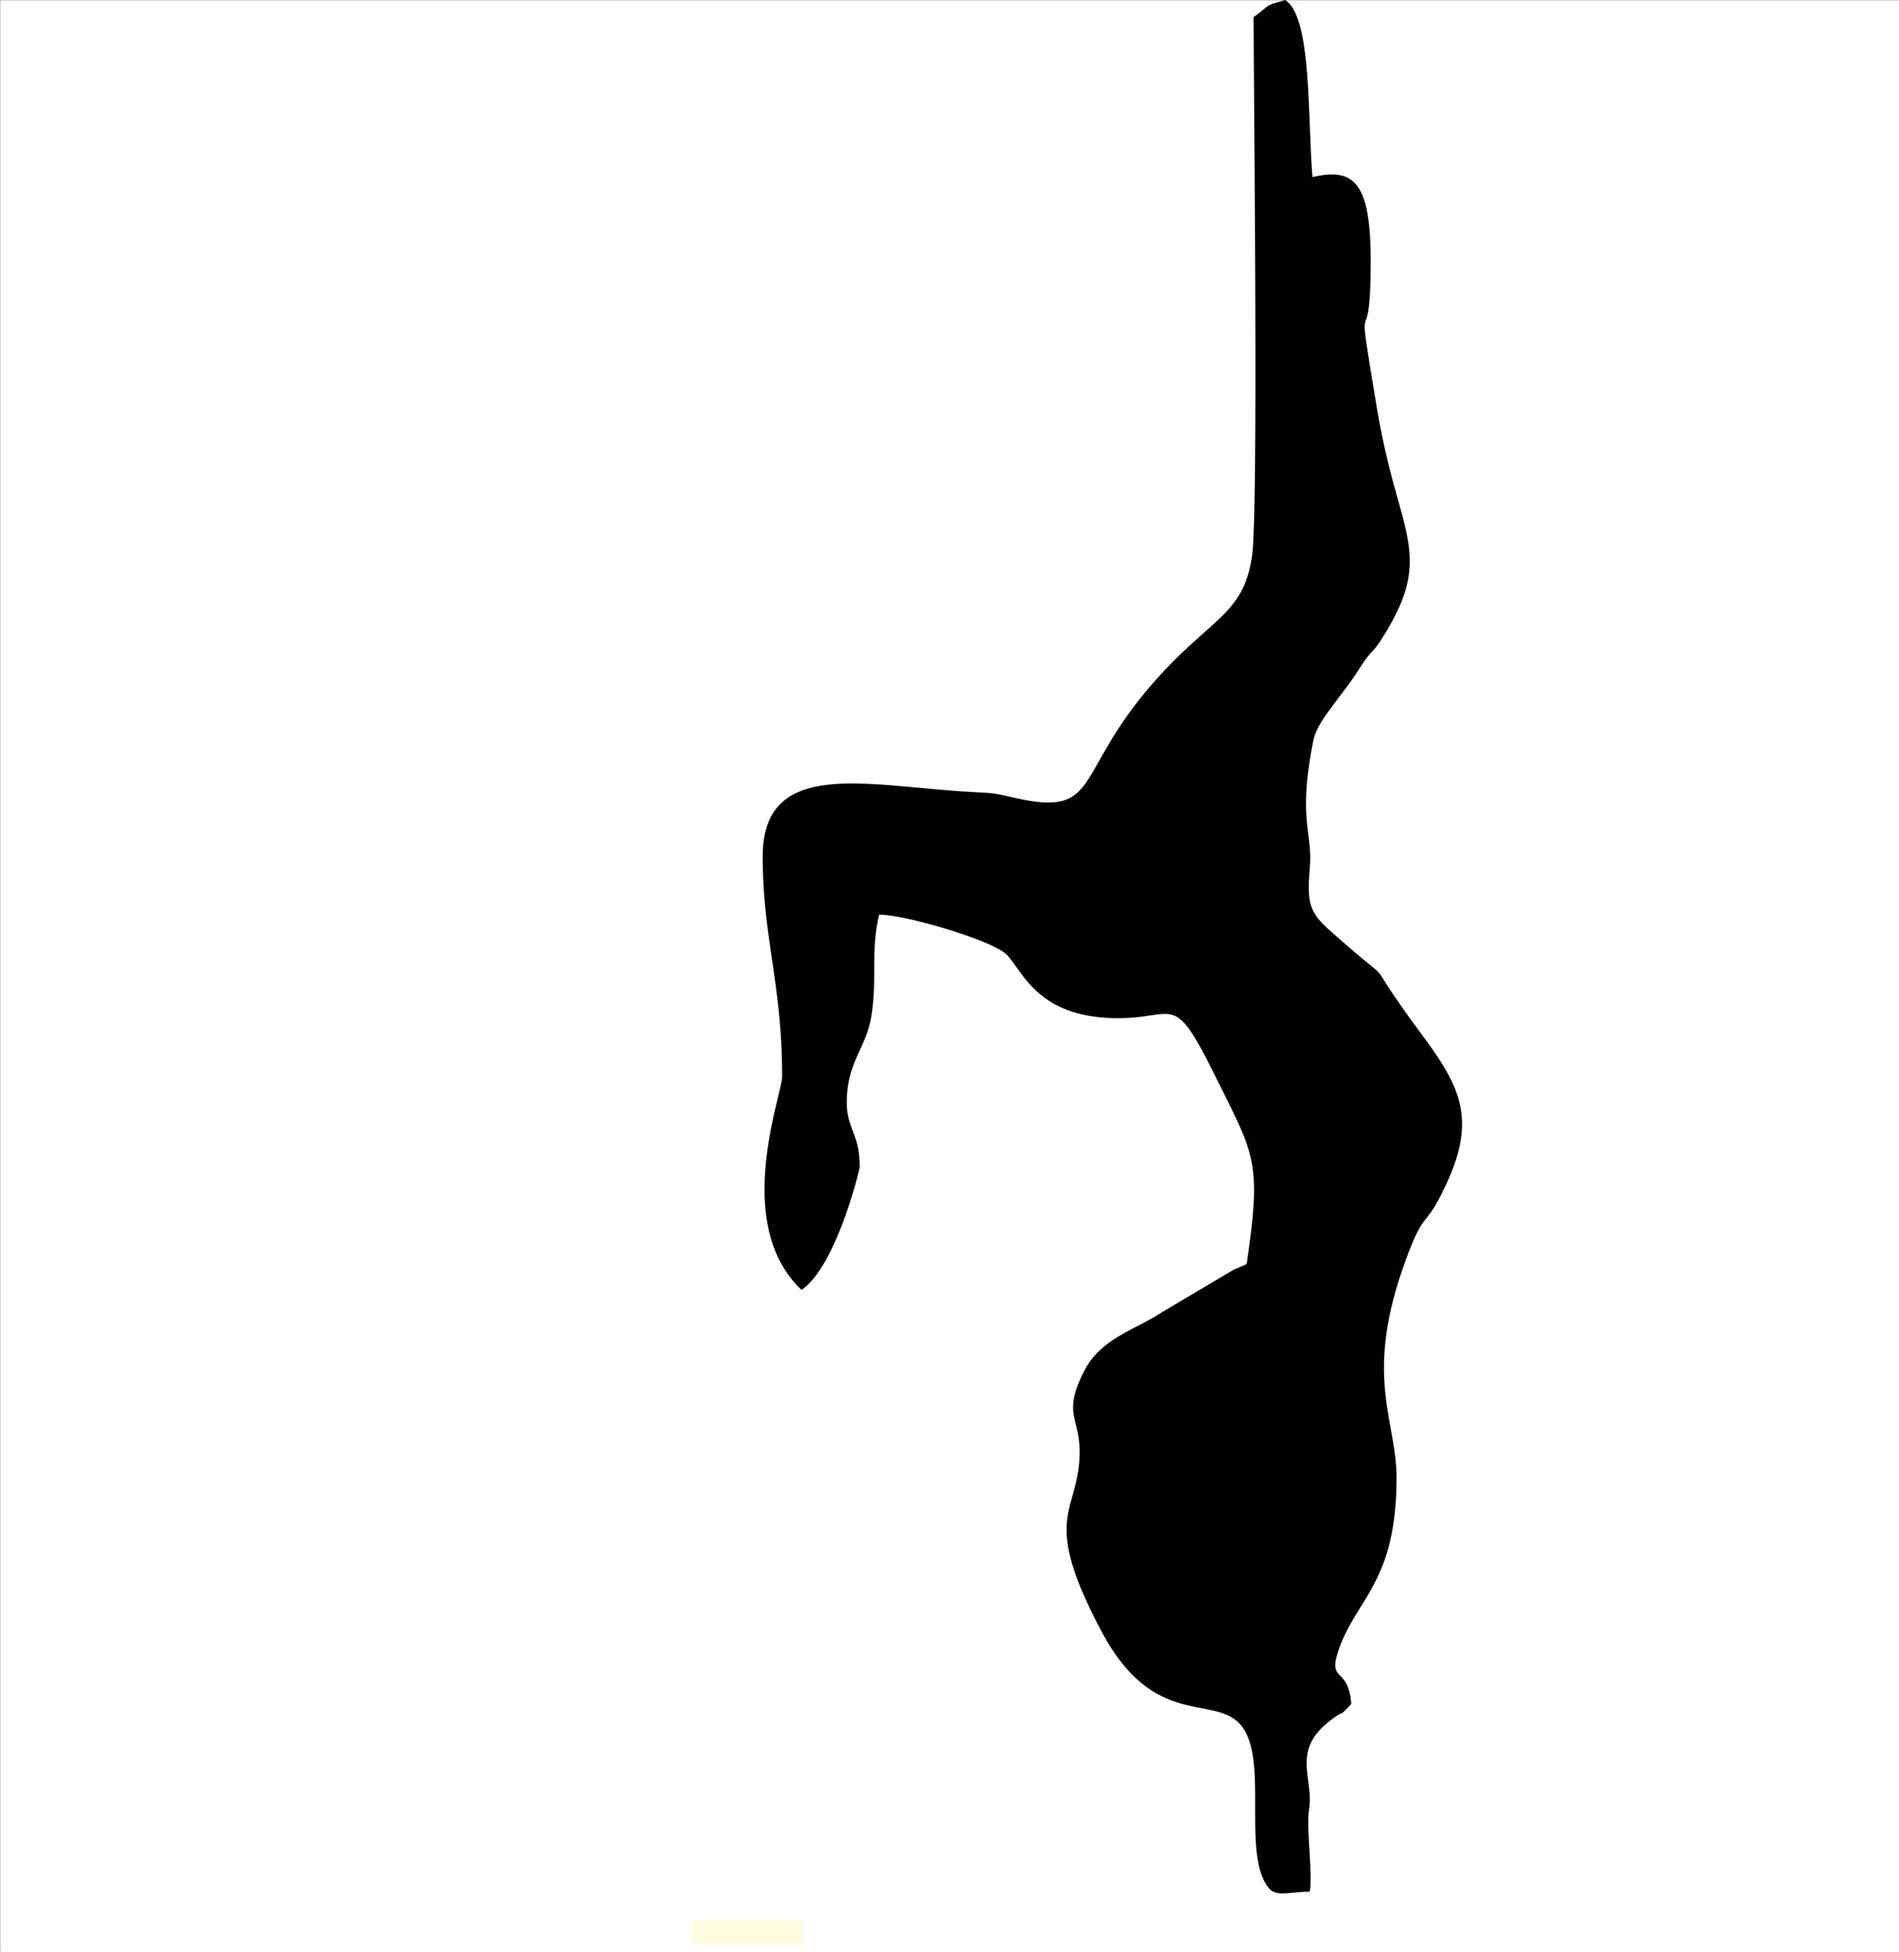 Download The best free Pole silhouette images. Download from 360 free silhouettes of Pole at GetDrawings